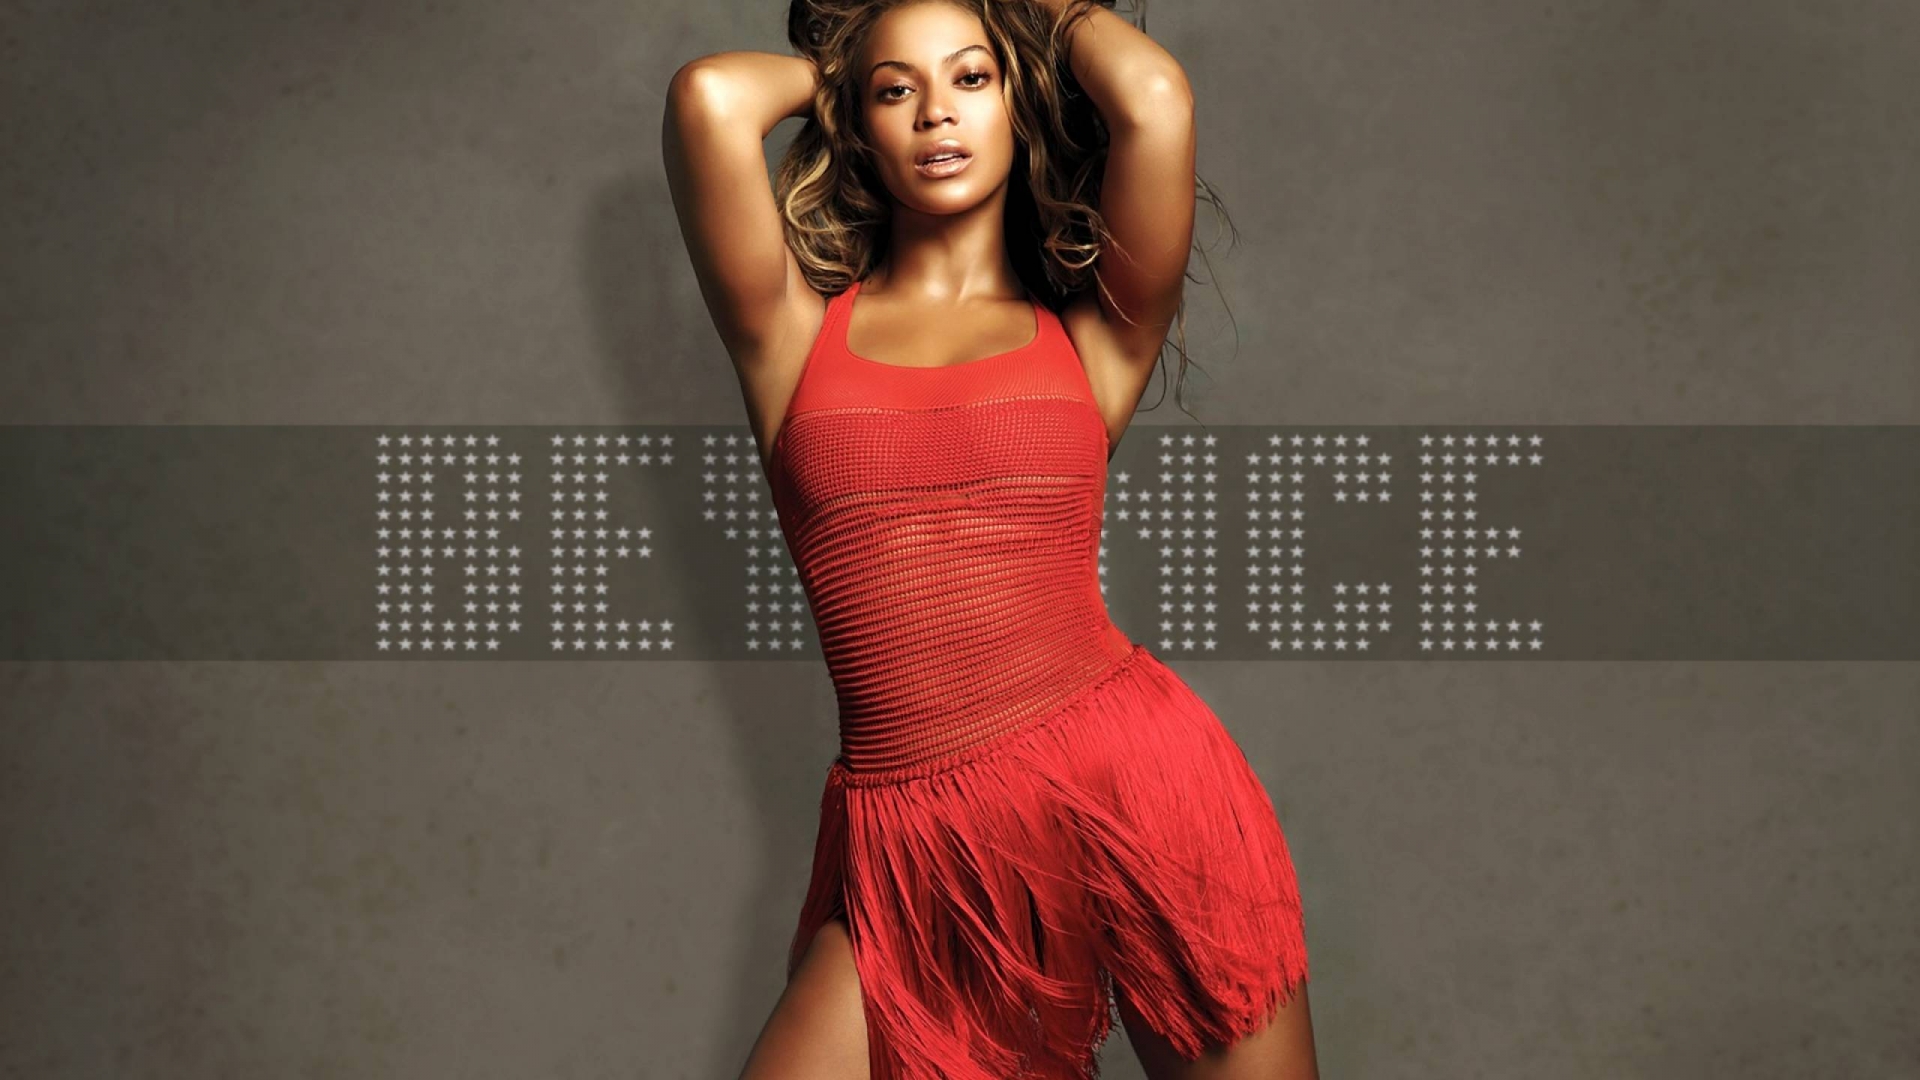 Beautiful Beyonce for 1920 x 1080 HDTV 1080p resolution